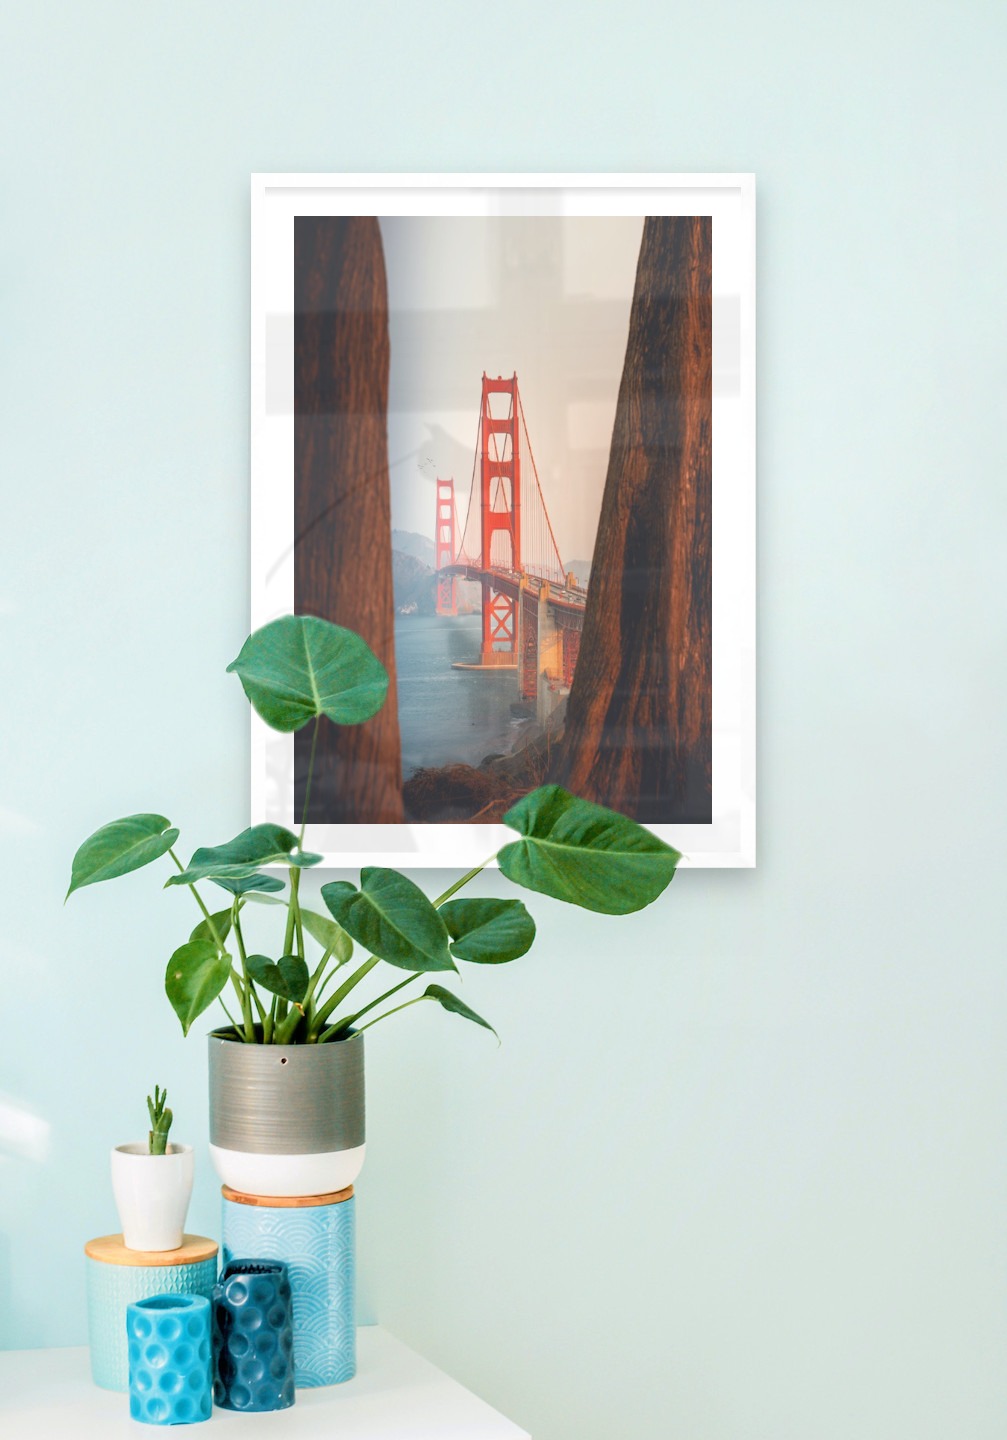 Gallery wall with picture frame in white in size 50x70 with print "Golden Gate Bridge"